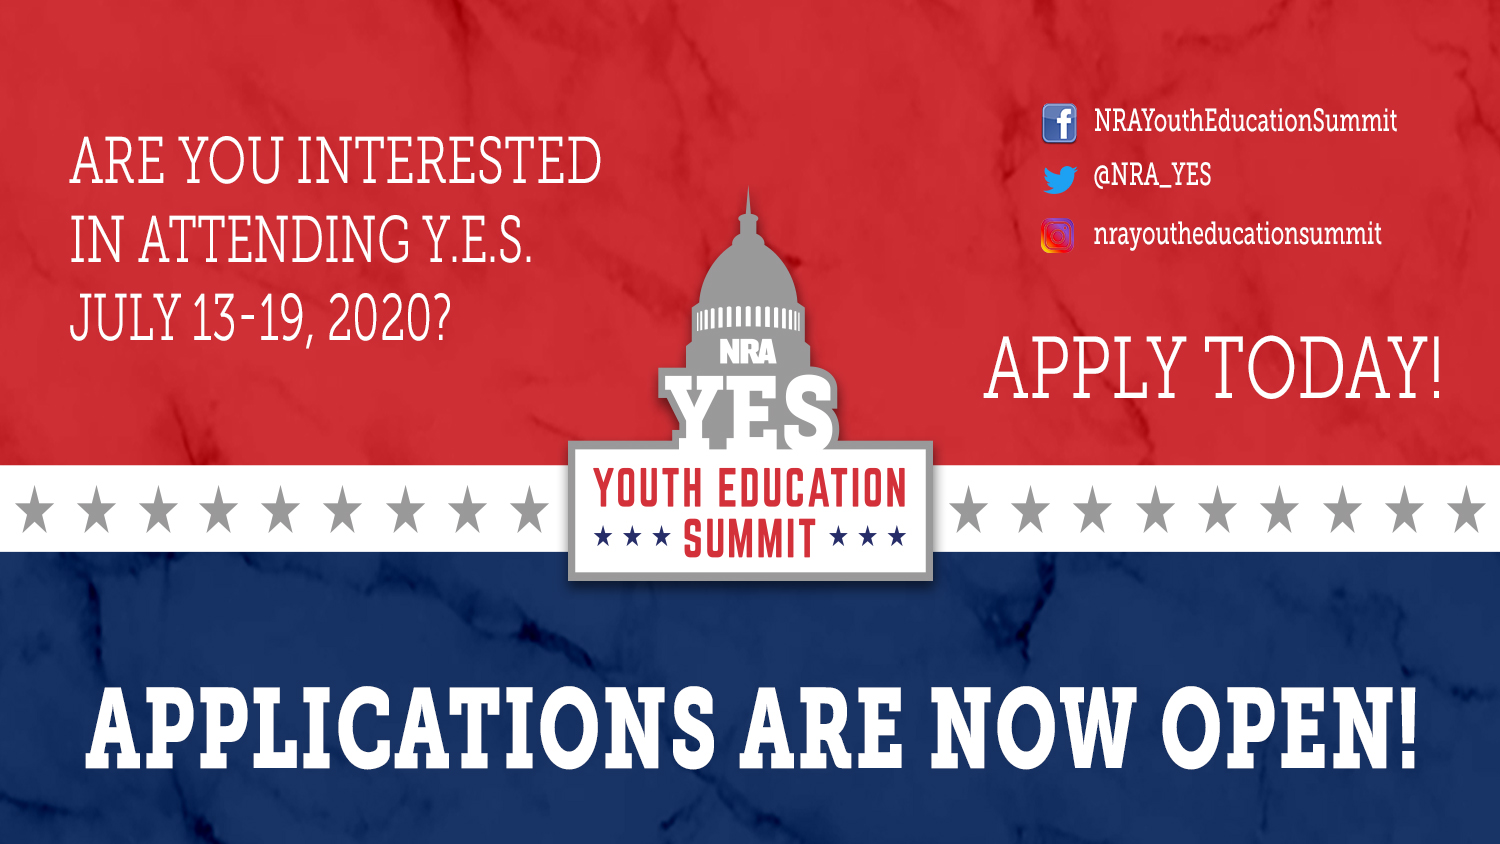 We Want You For Y.E.S. 2020